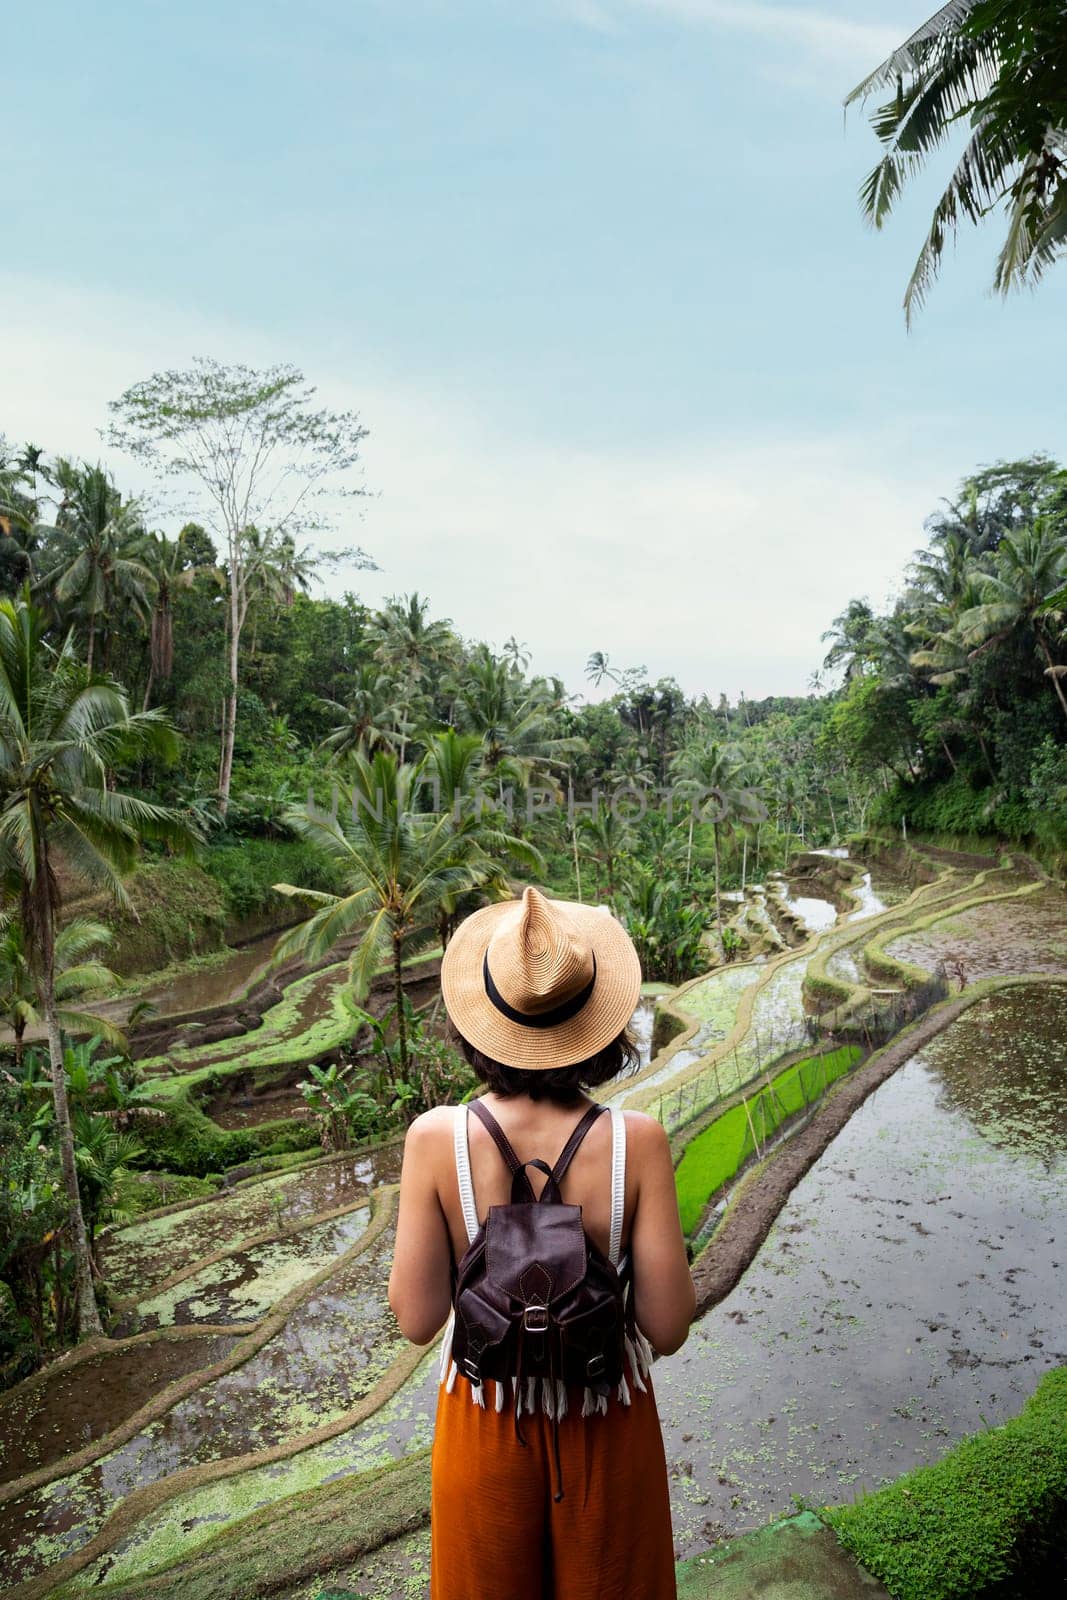 Indonesia. Woman enjoying vacation and freedom in nature. Copy space. Vertical. by Hoverstock